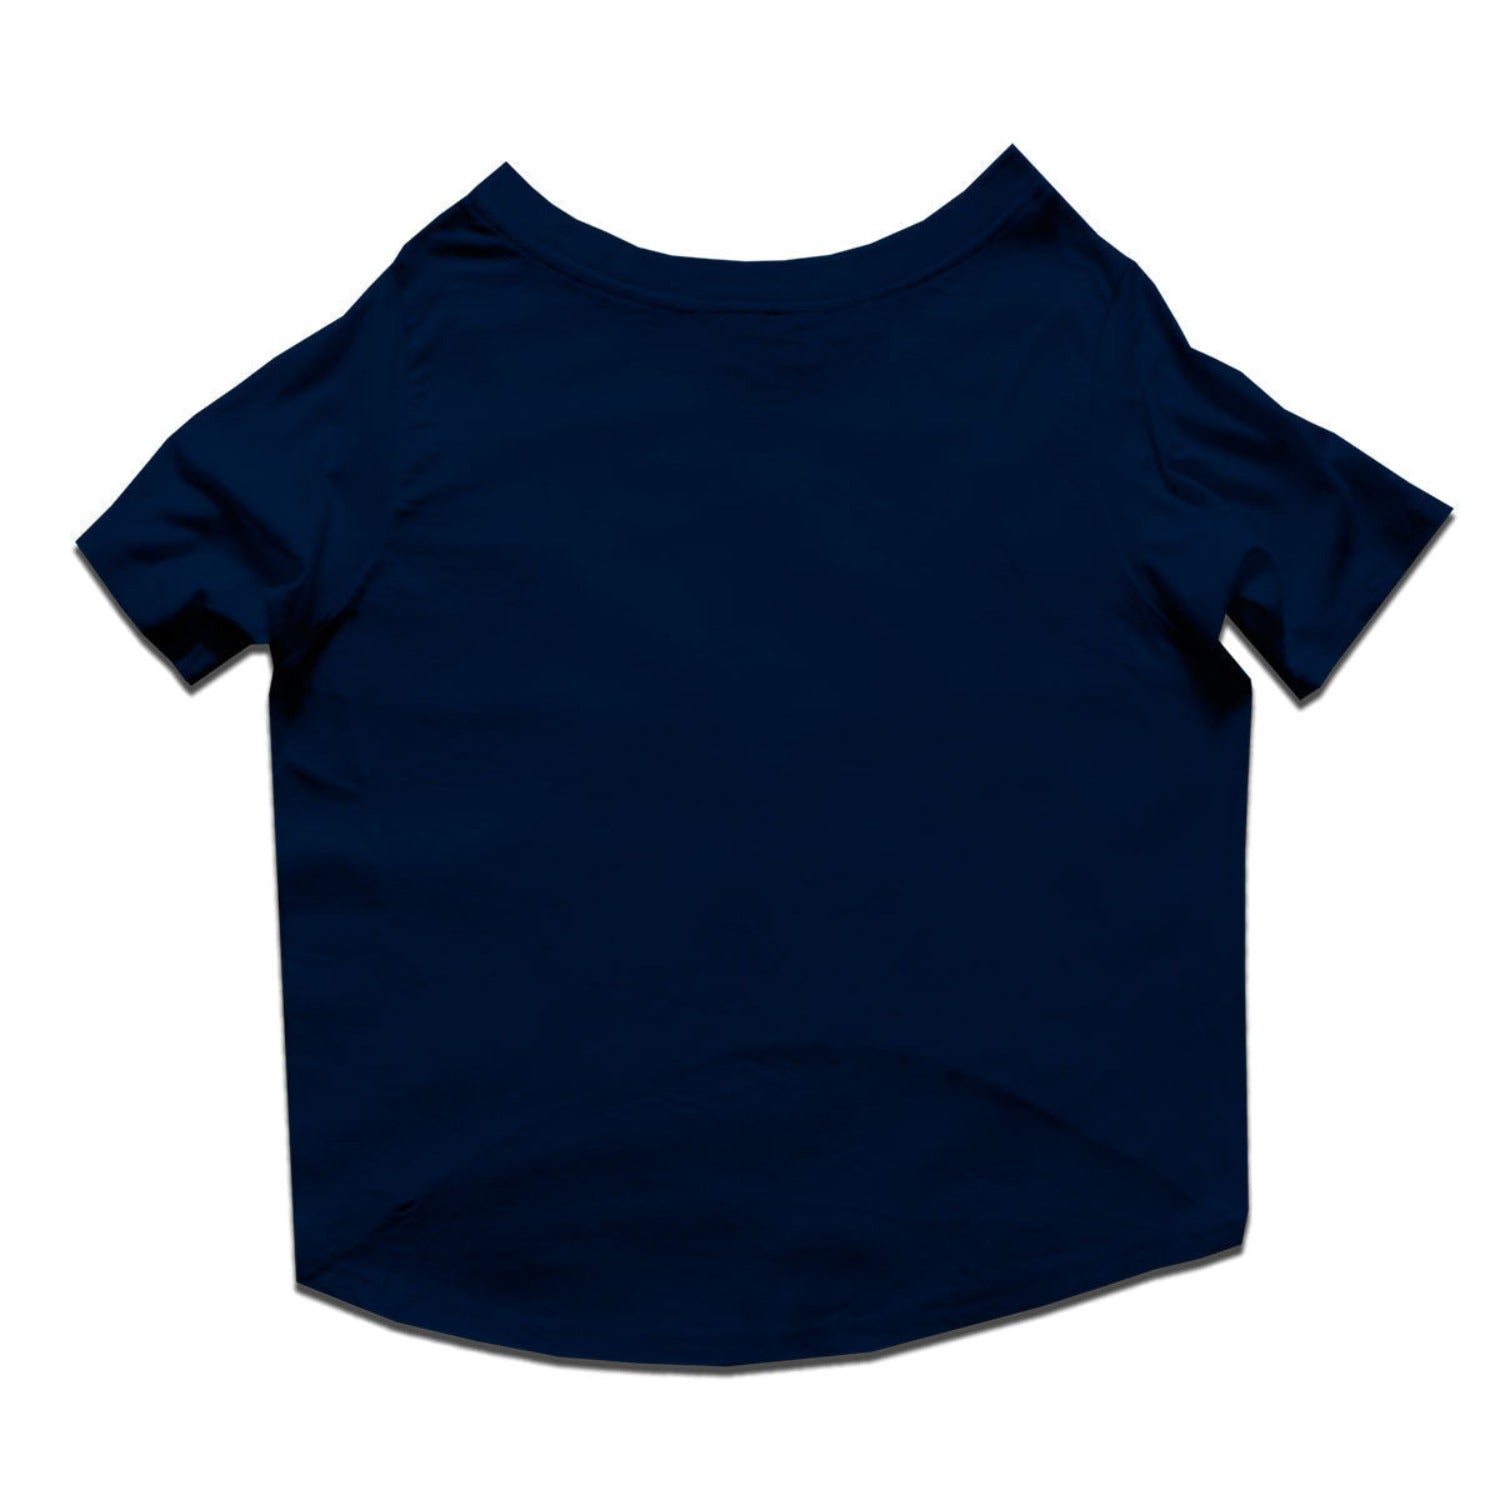 Ruse / can-i-play-with-your-human-crew-neck-dog-tee / Navy